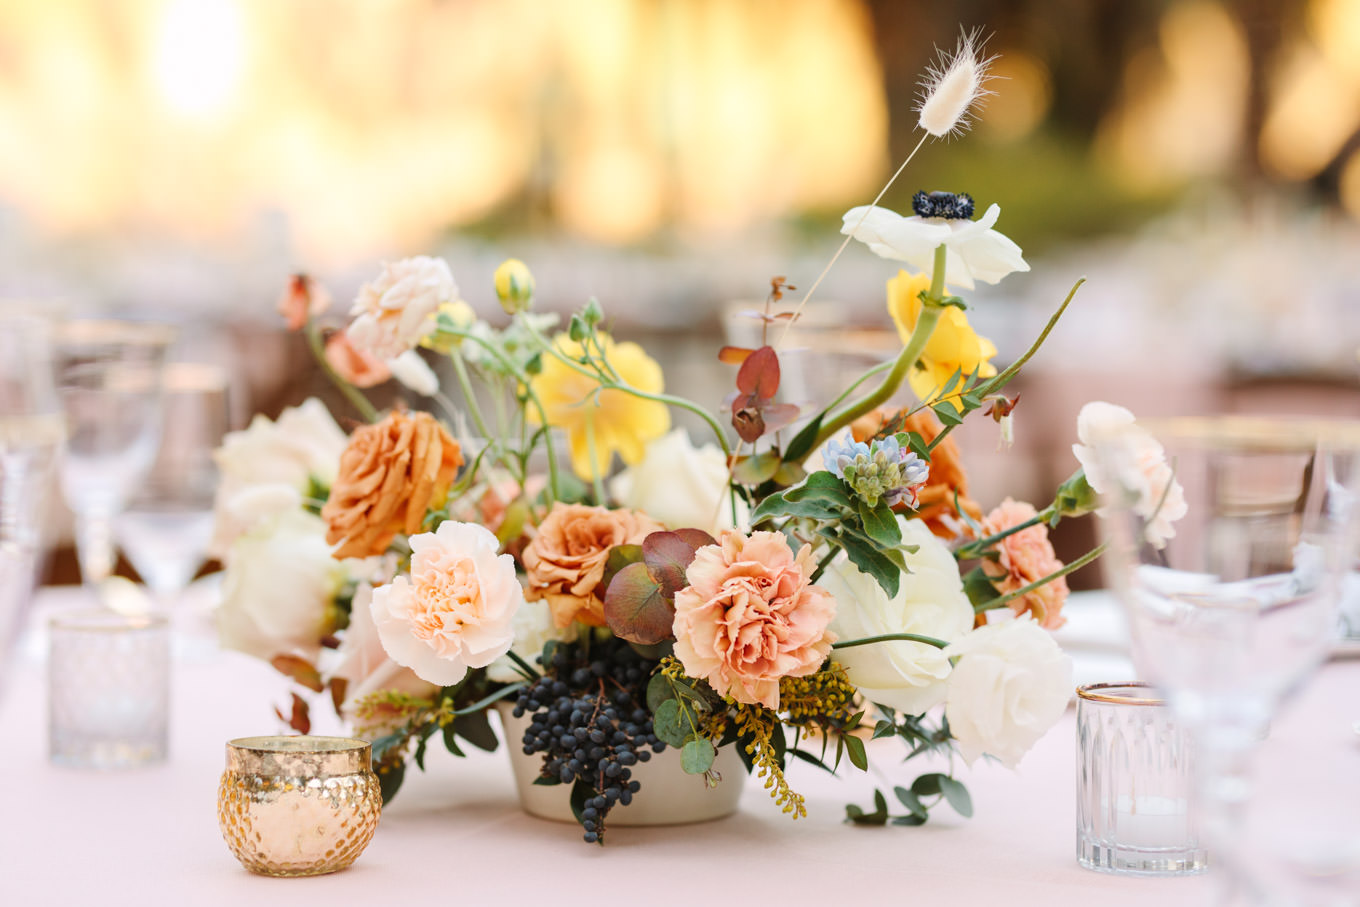 Floral arrangement at wedding reception | Living Desert Zoo & Gardens wedding with unique details | Elevated and colorful wedding photography for fun-loving couples in Southern California |  #PalmSprings #palmspringsphotographer #gardenwedding #palmspringswedding  Source: Mary Costa Photography | Los Angeles wedding photographer 